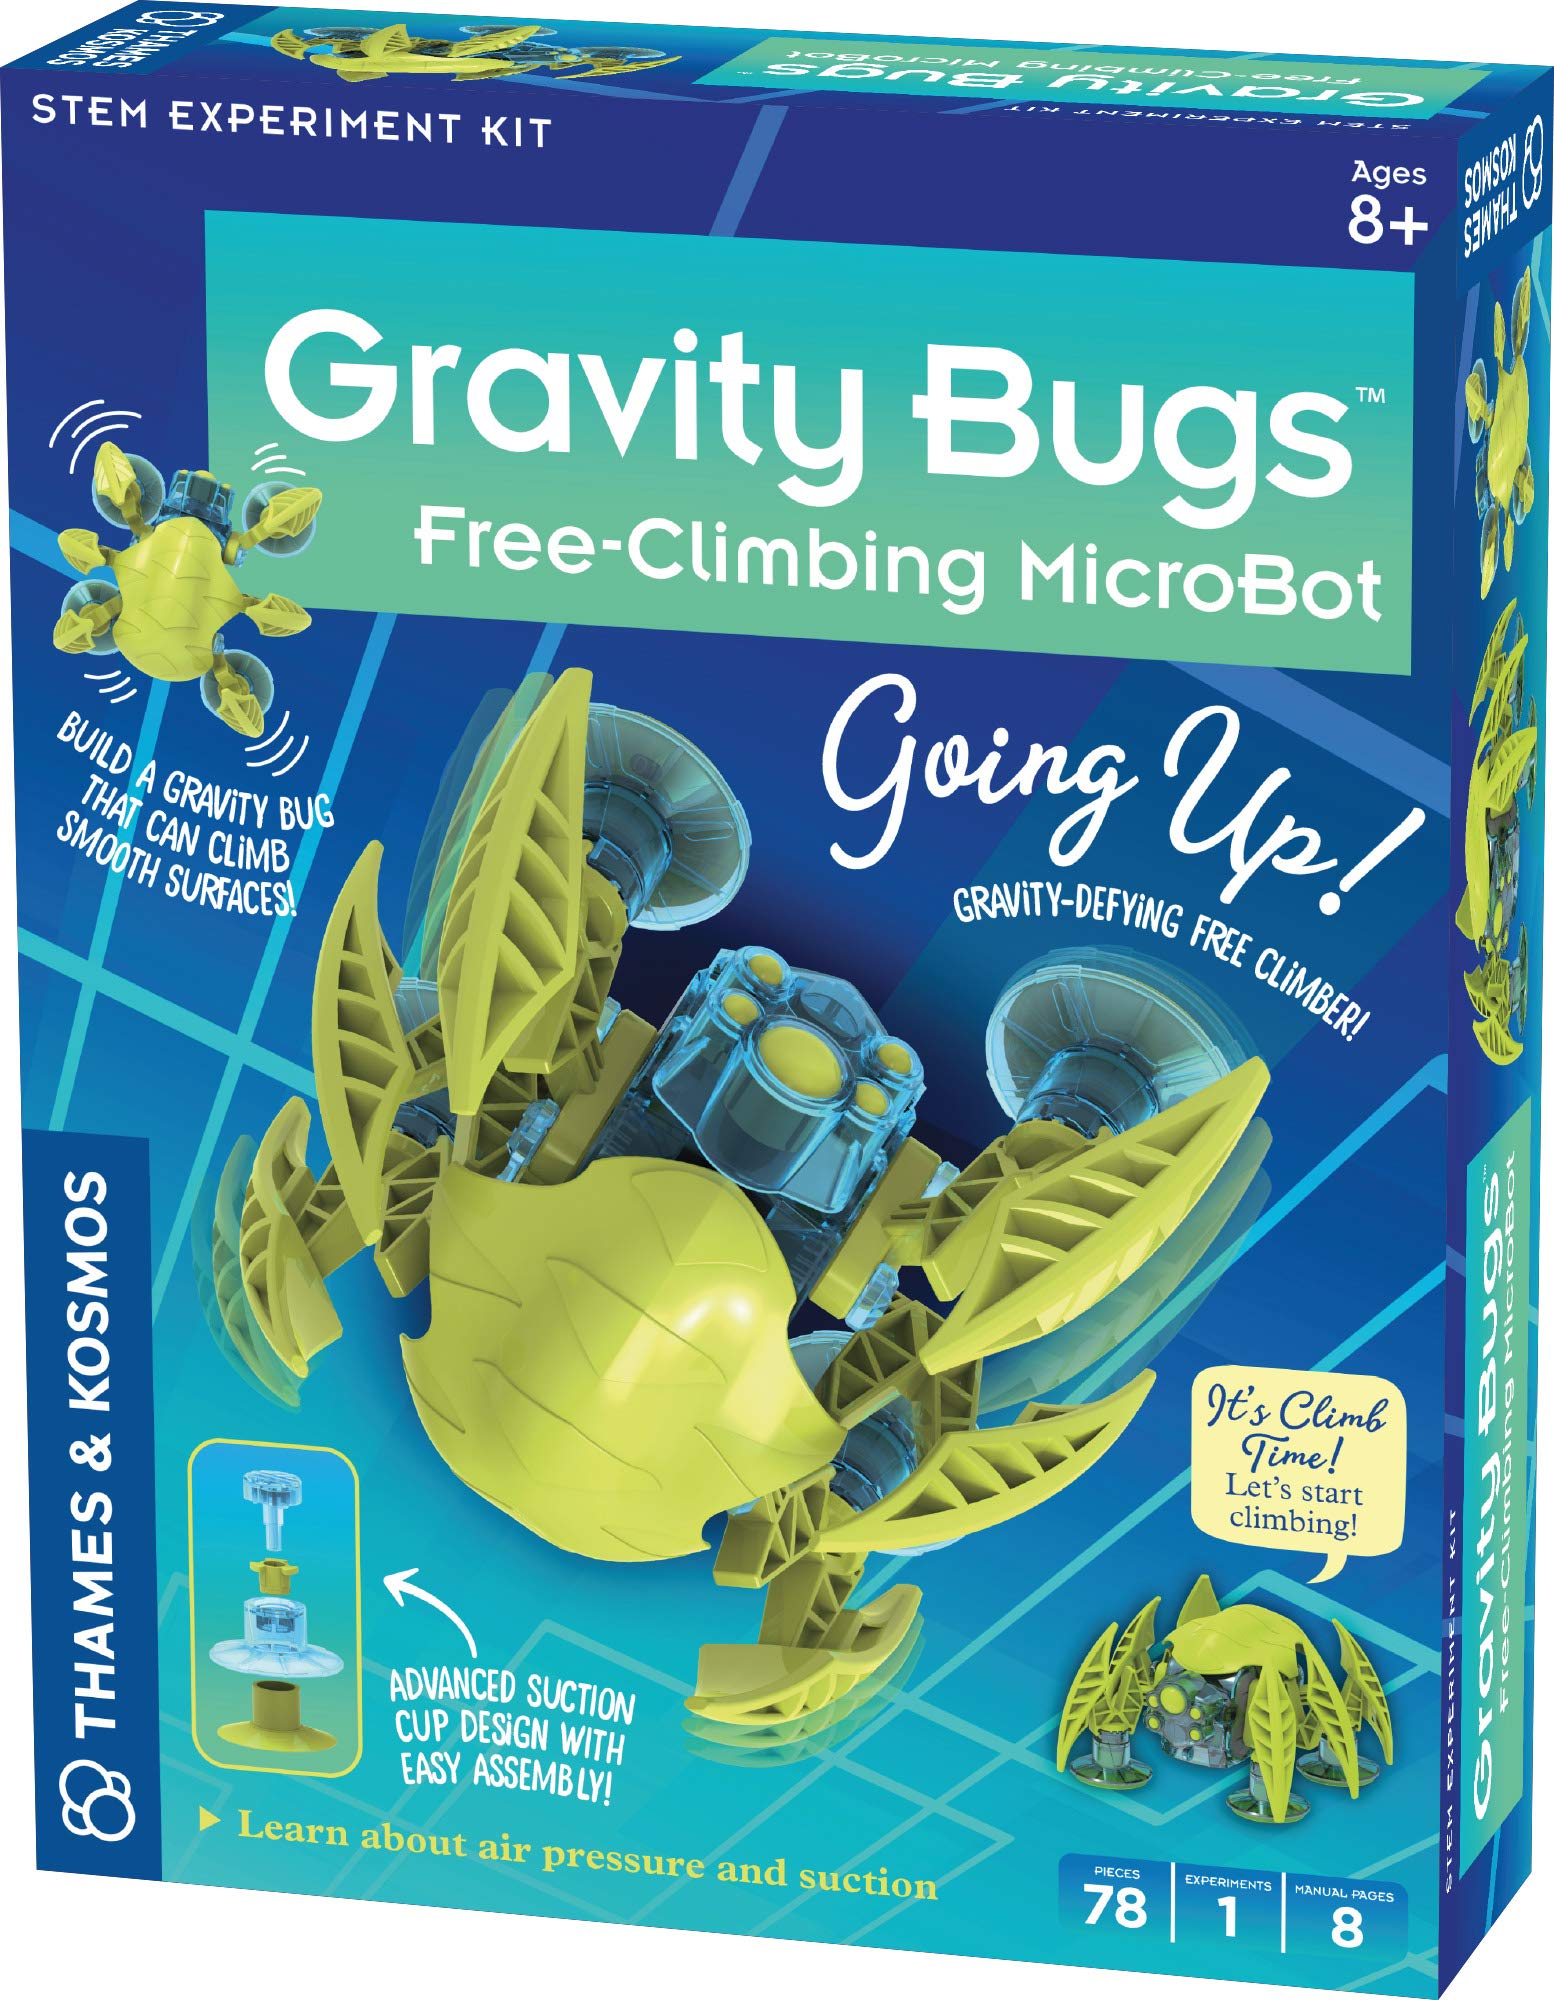 Thames & Kosmos: Buildable Robotic Wall-Crawling Gravity Bugs MicroBot(STEM Toy/ Building Kit) $4.88 + Free Shipping w/ Prime or on $35+